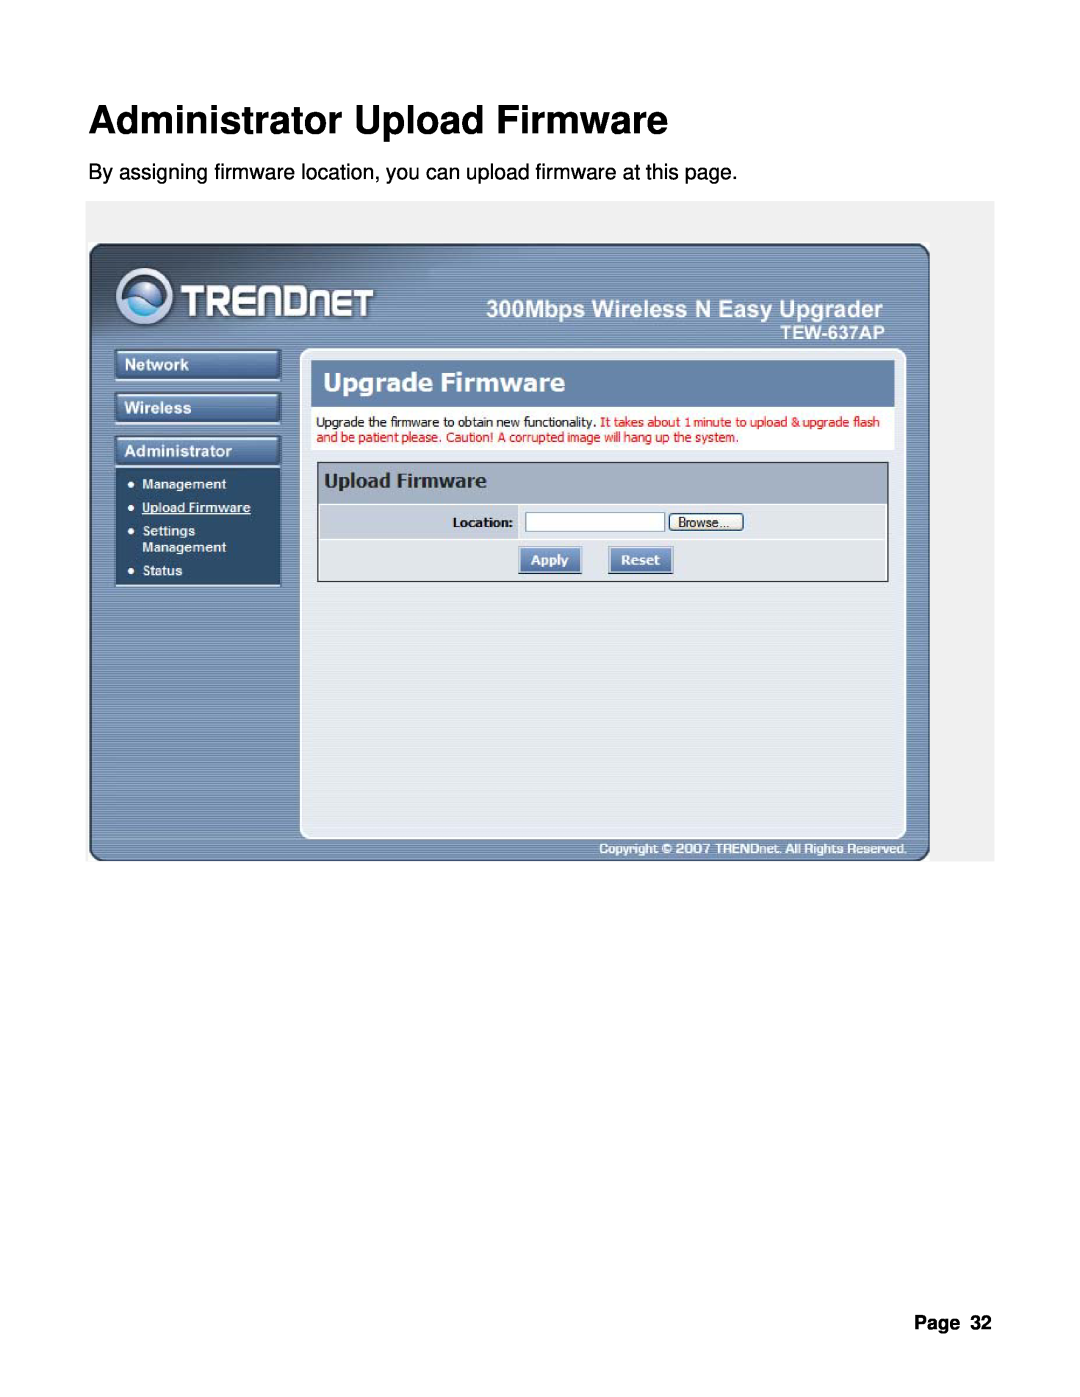 TRENDnet TEW-637AP Administrator Upload Firmware, By assigning firmware location, you can upload firmware at this page 